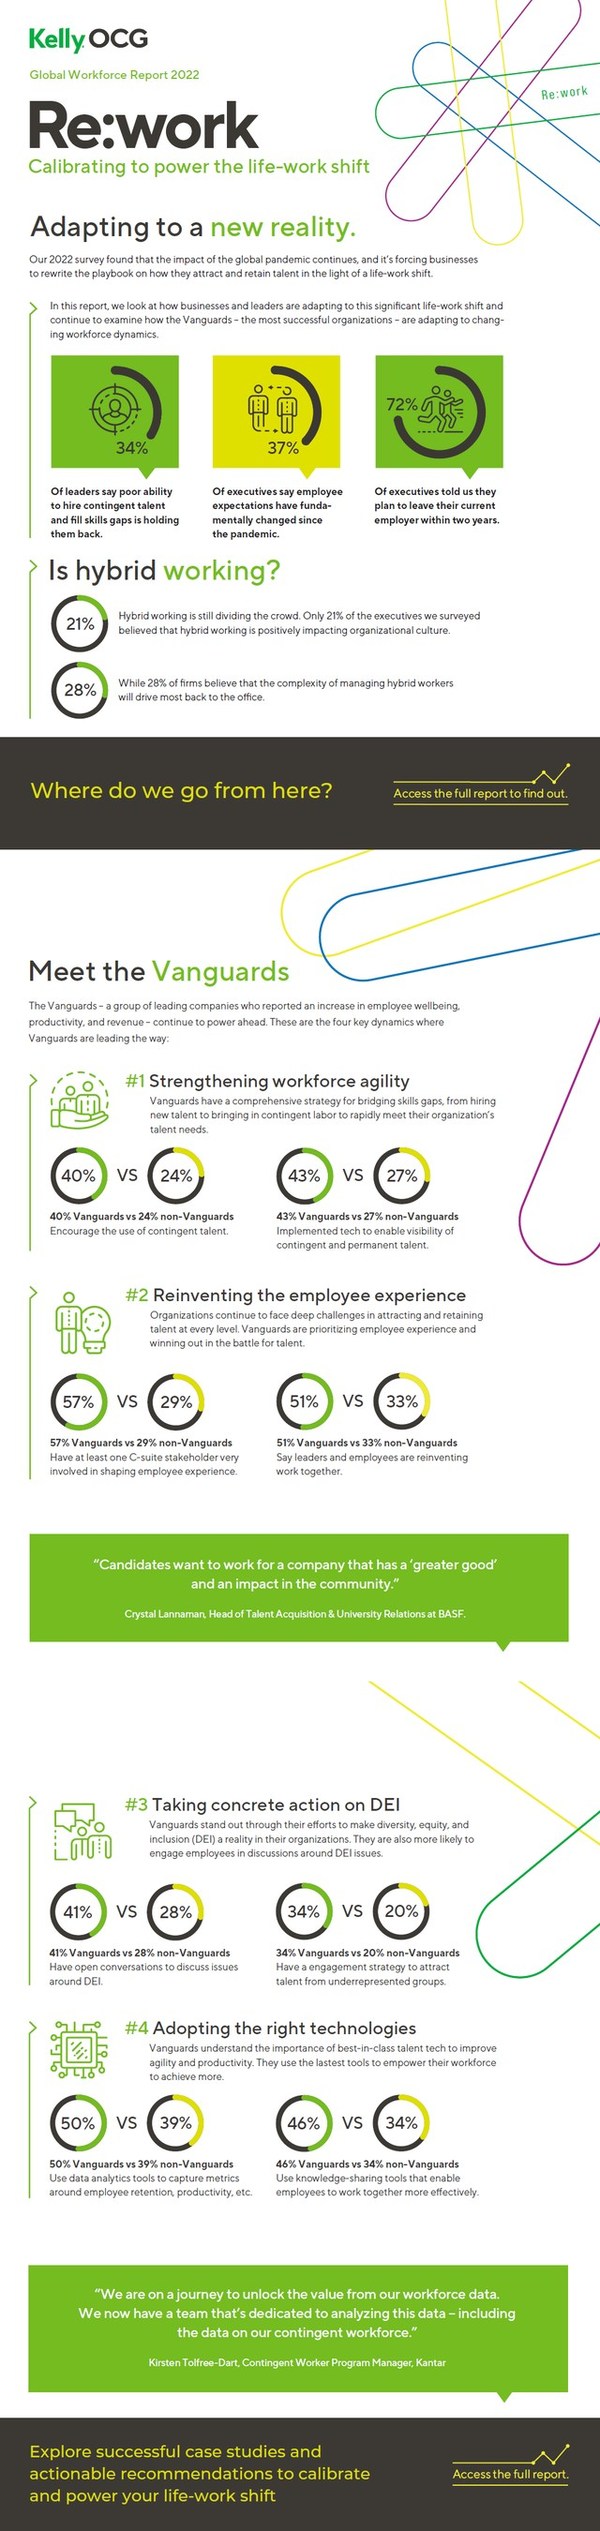 KellyOCG Global Workforce Report 2022 -- Re:work Calibrating to power the life-work shift